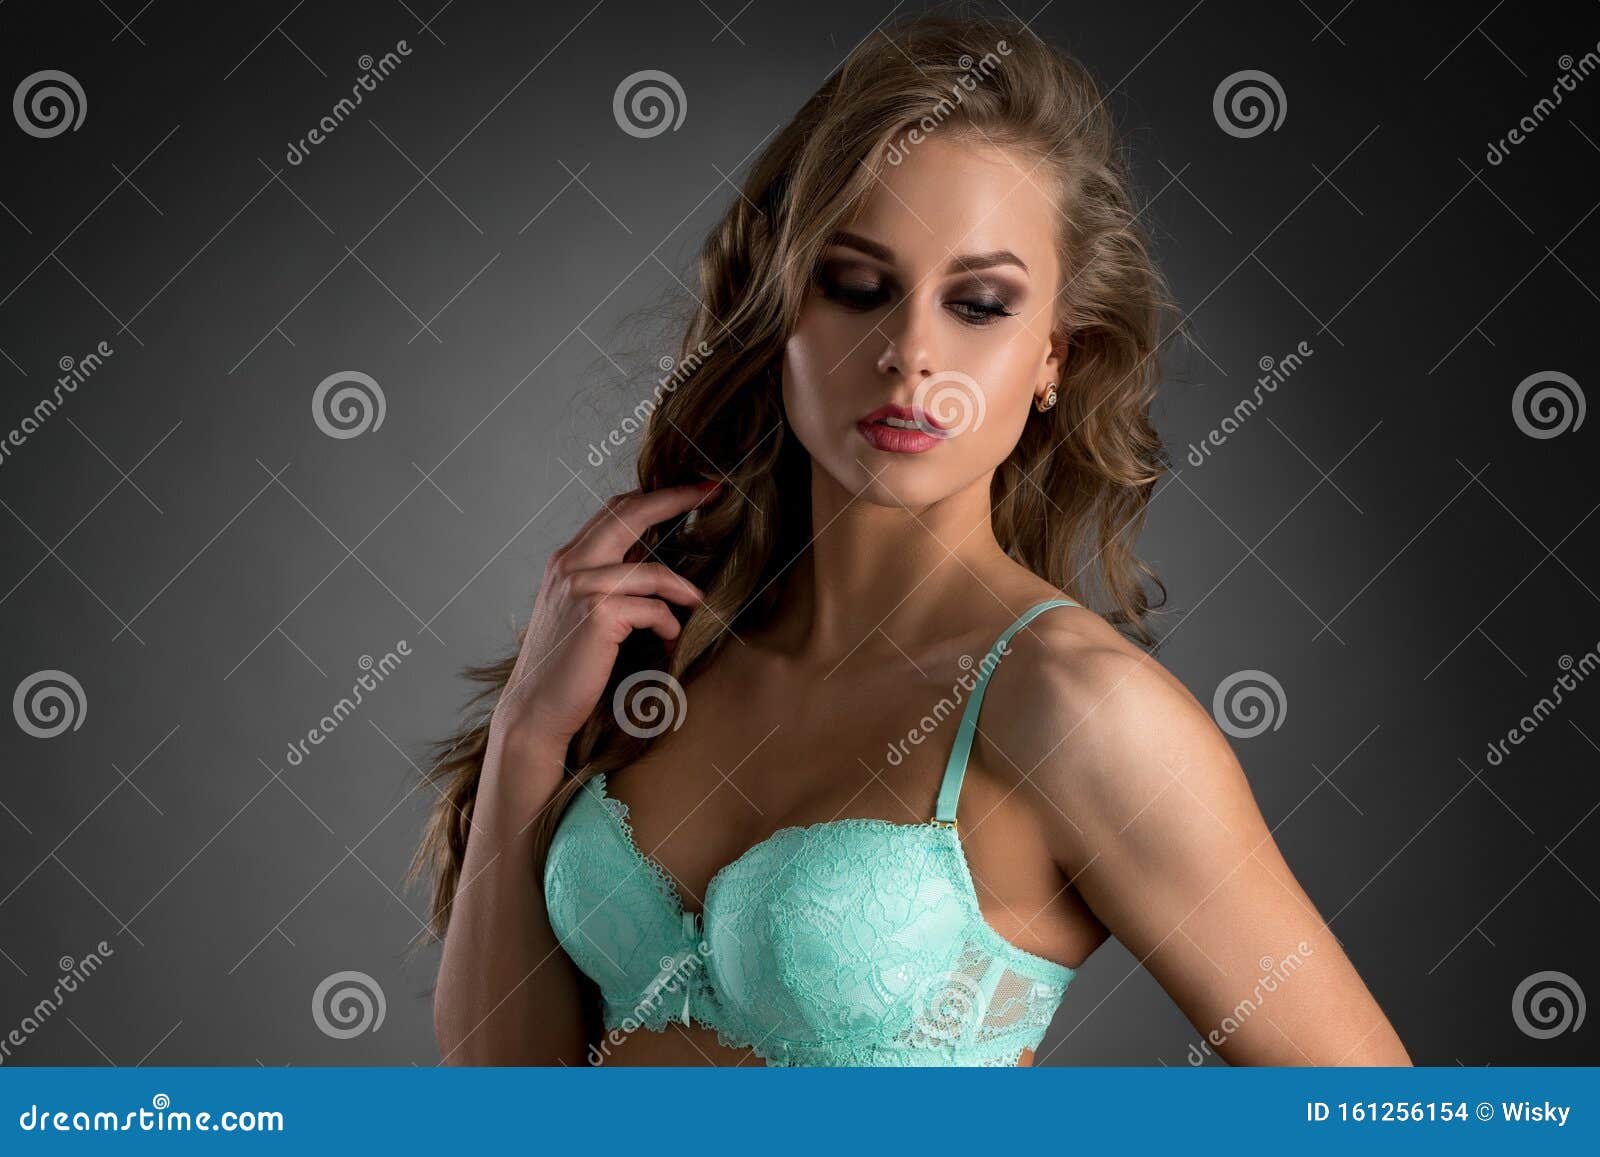 9,139 Sexy Girl Bra Photos - Royalty-Free Stock Photos from Dreamstime